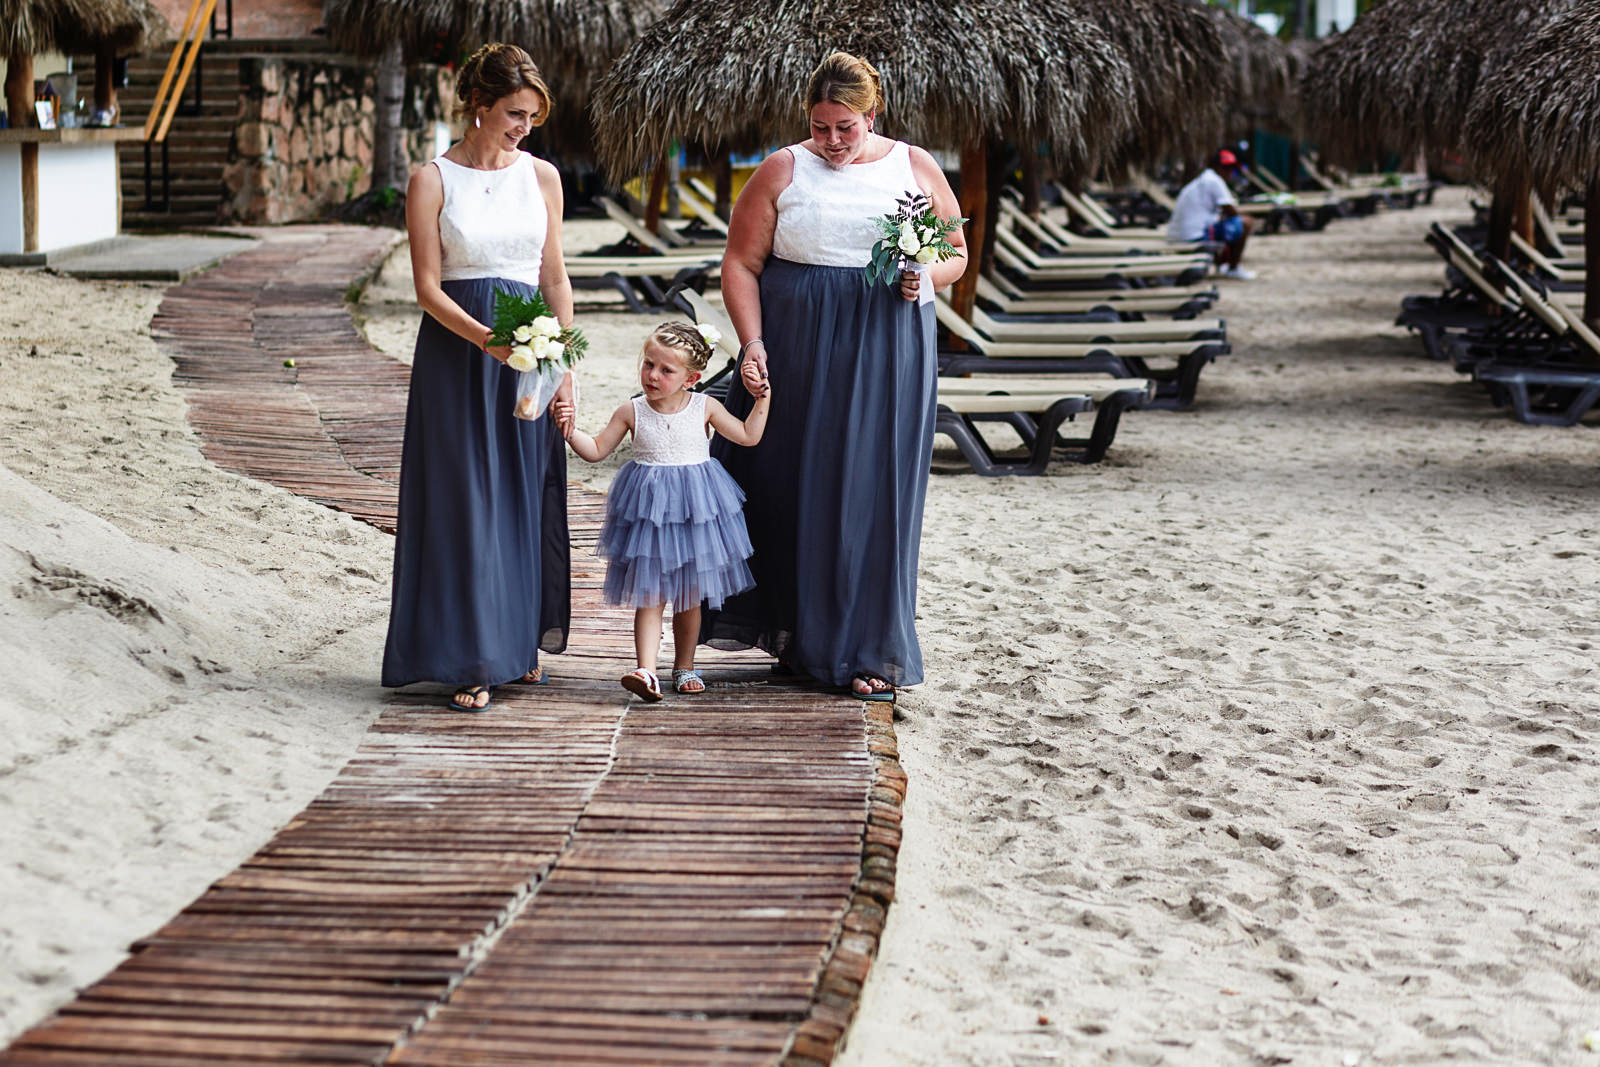 Bridesmaids and flower girl walking down a wood path on the beach for the wedding ceremony to start.